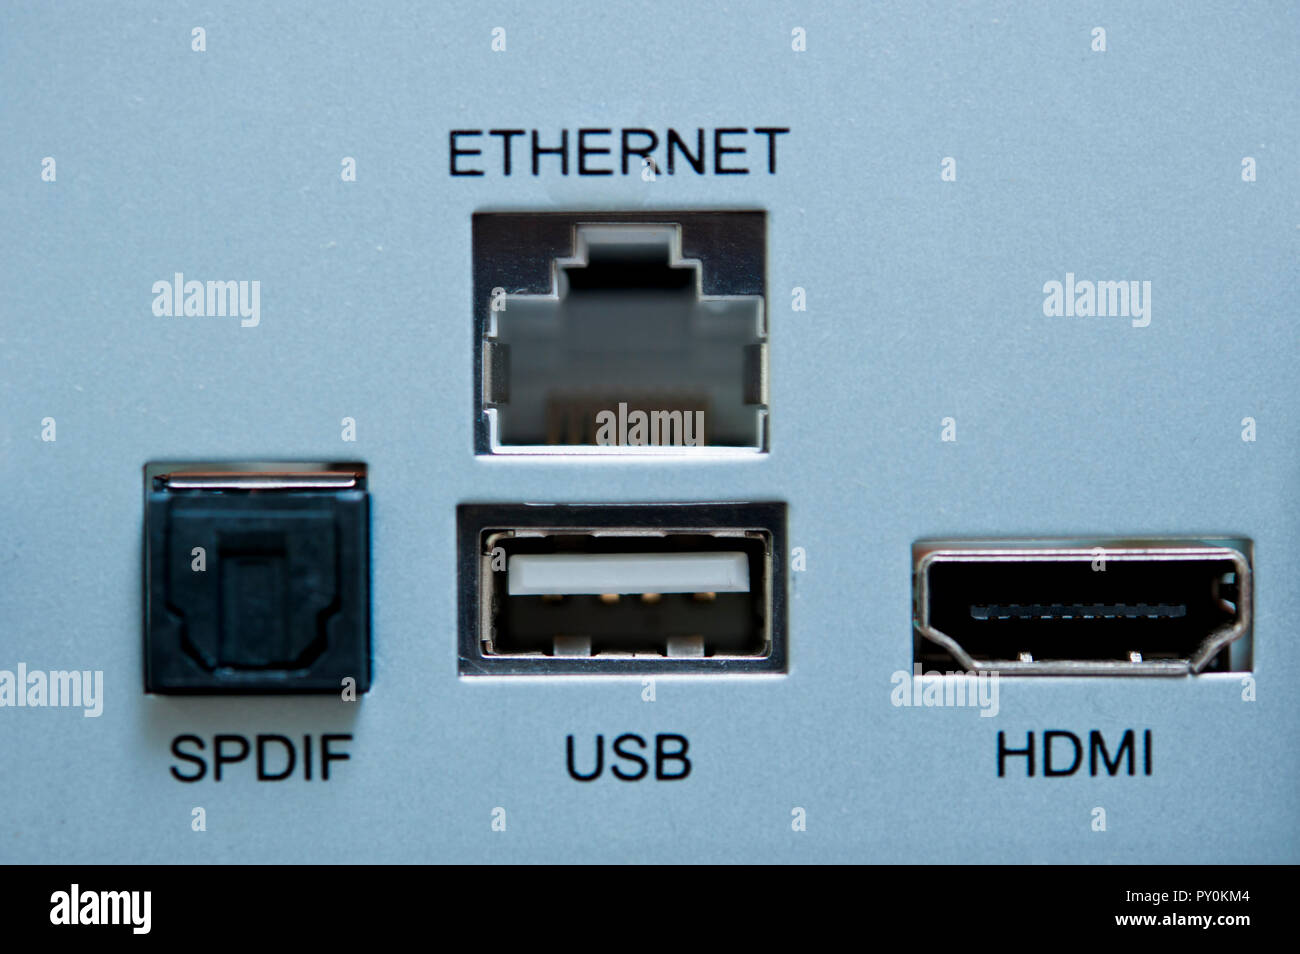 ethernet-usb-hdmi-and-spdif-ports-on-the-back-of-a-set-top-box-PY0KM4.jpg